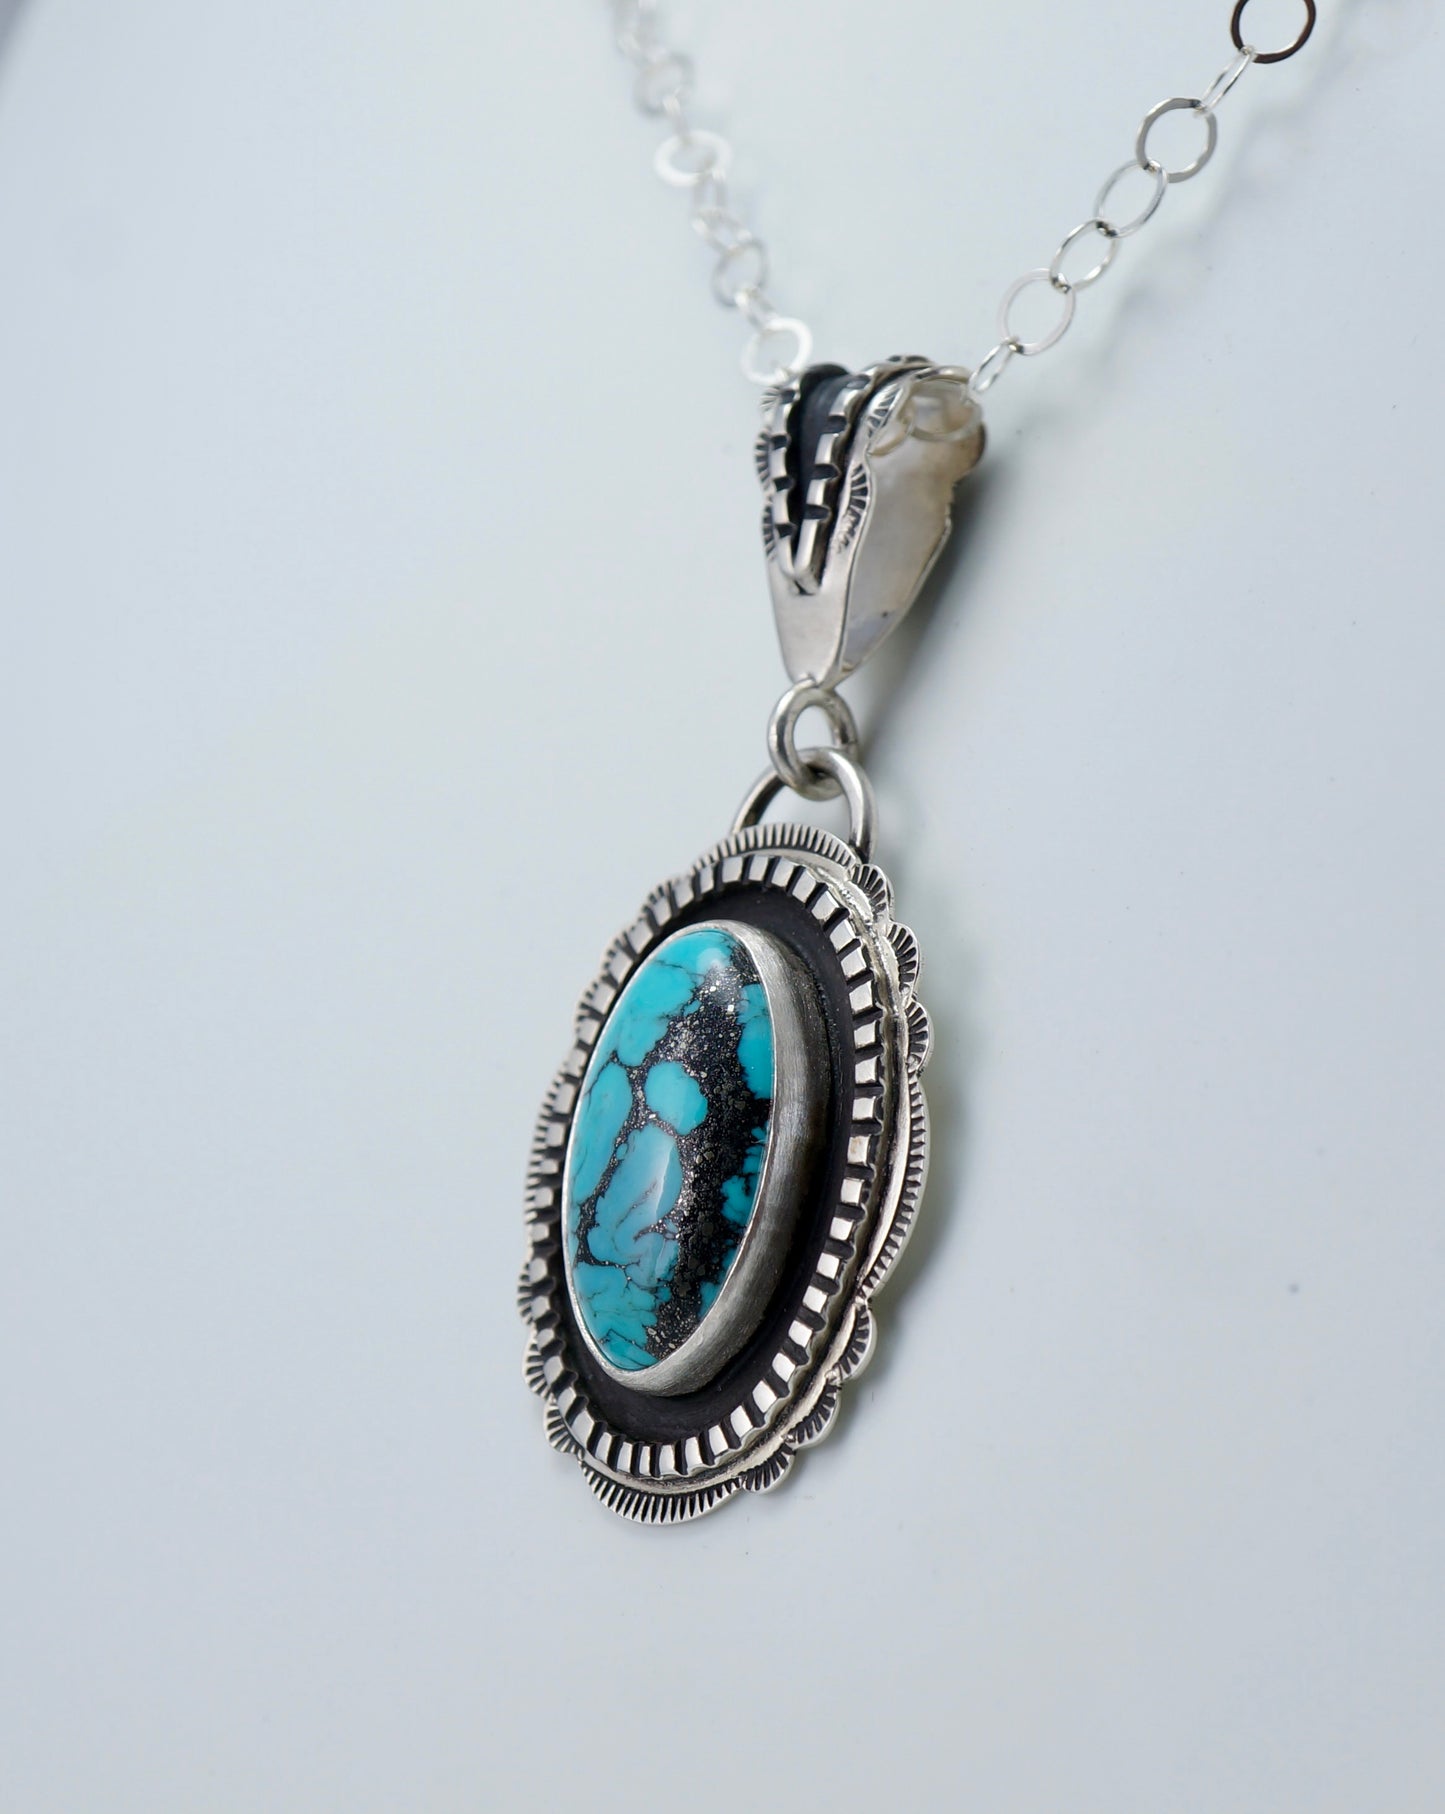 Genuine Turquoise Pendant and Necklace